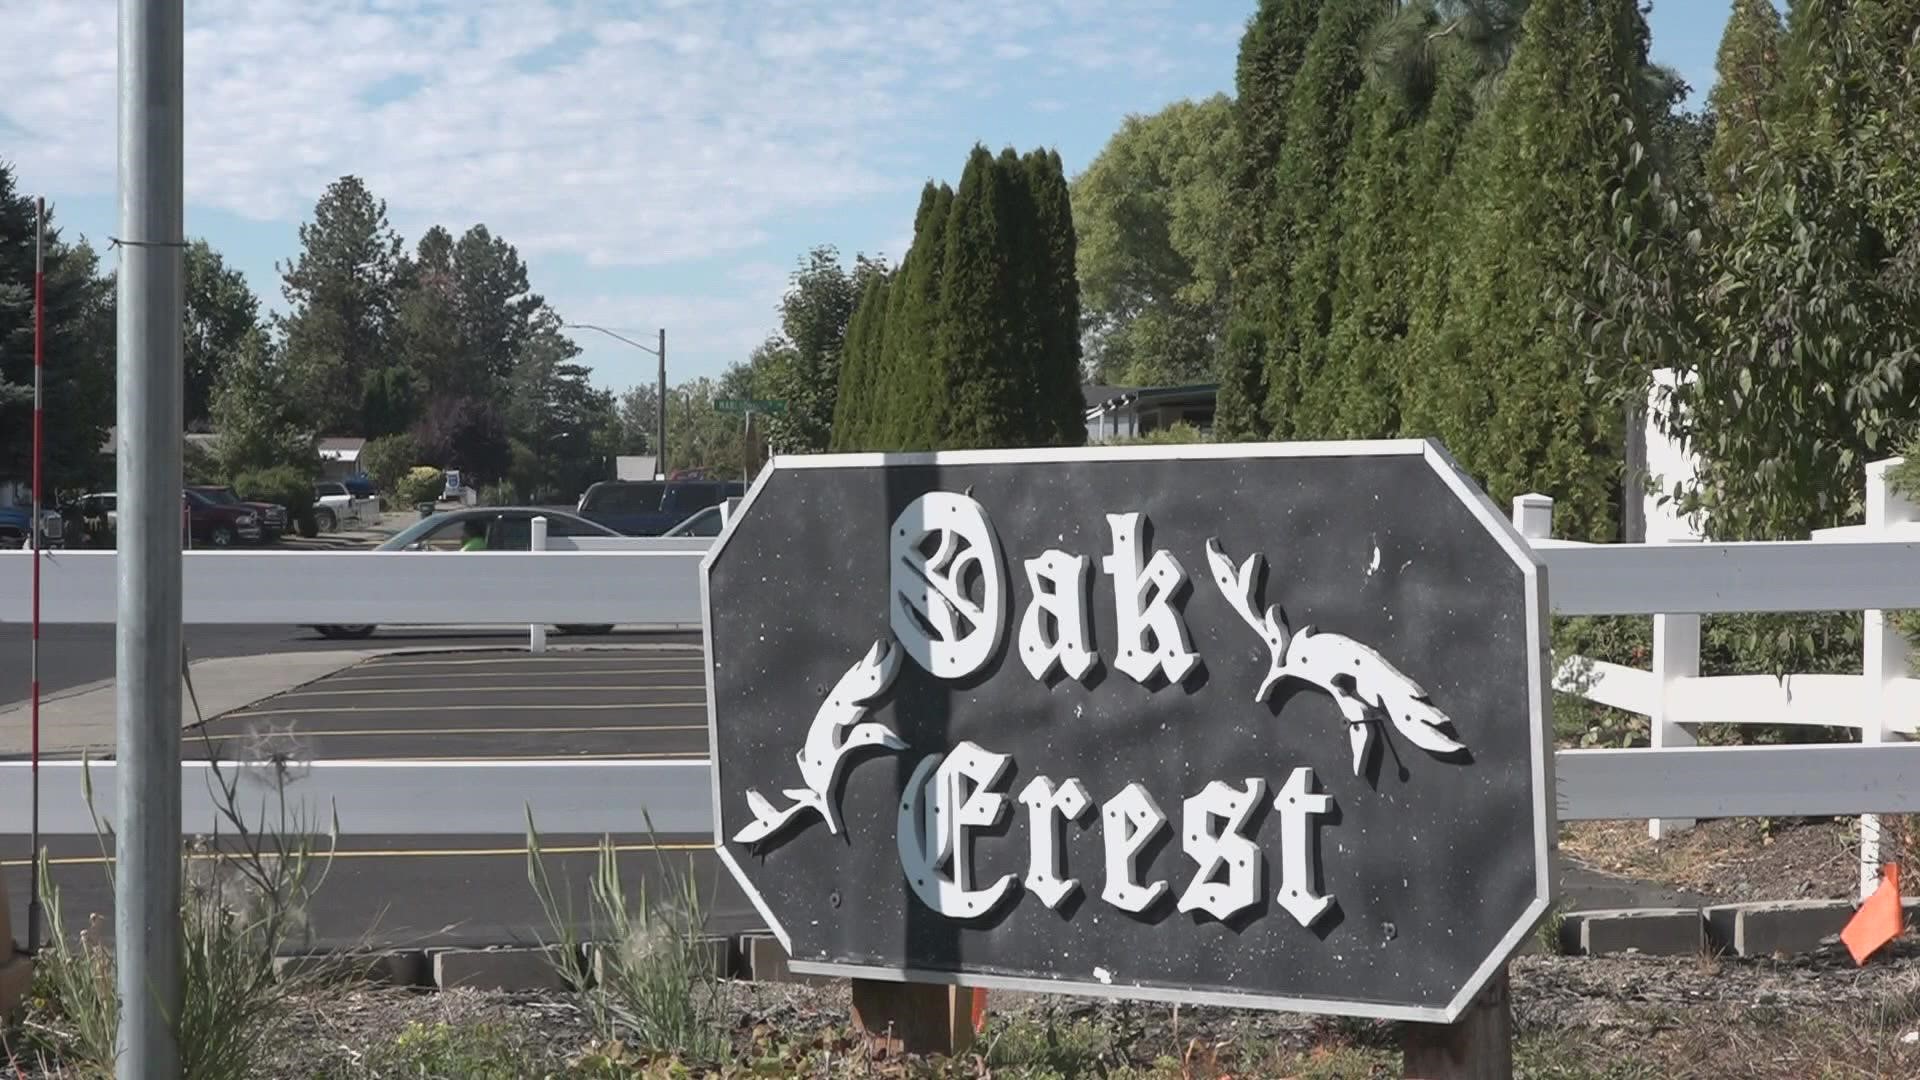 The Oak Crest mobile home community in Coeur d'Alene is making a stand to buy back the land their homes stand on.